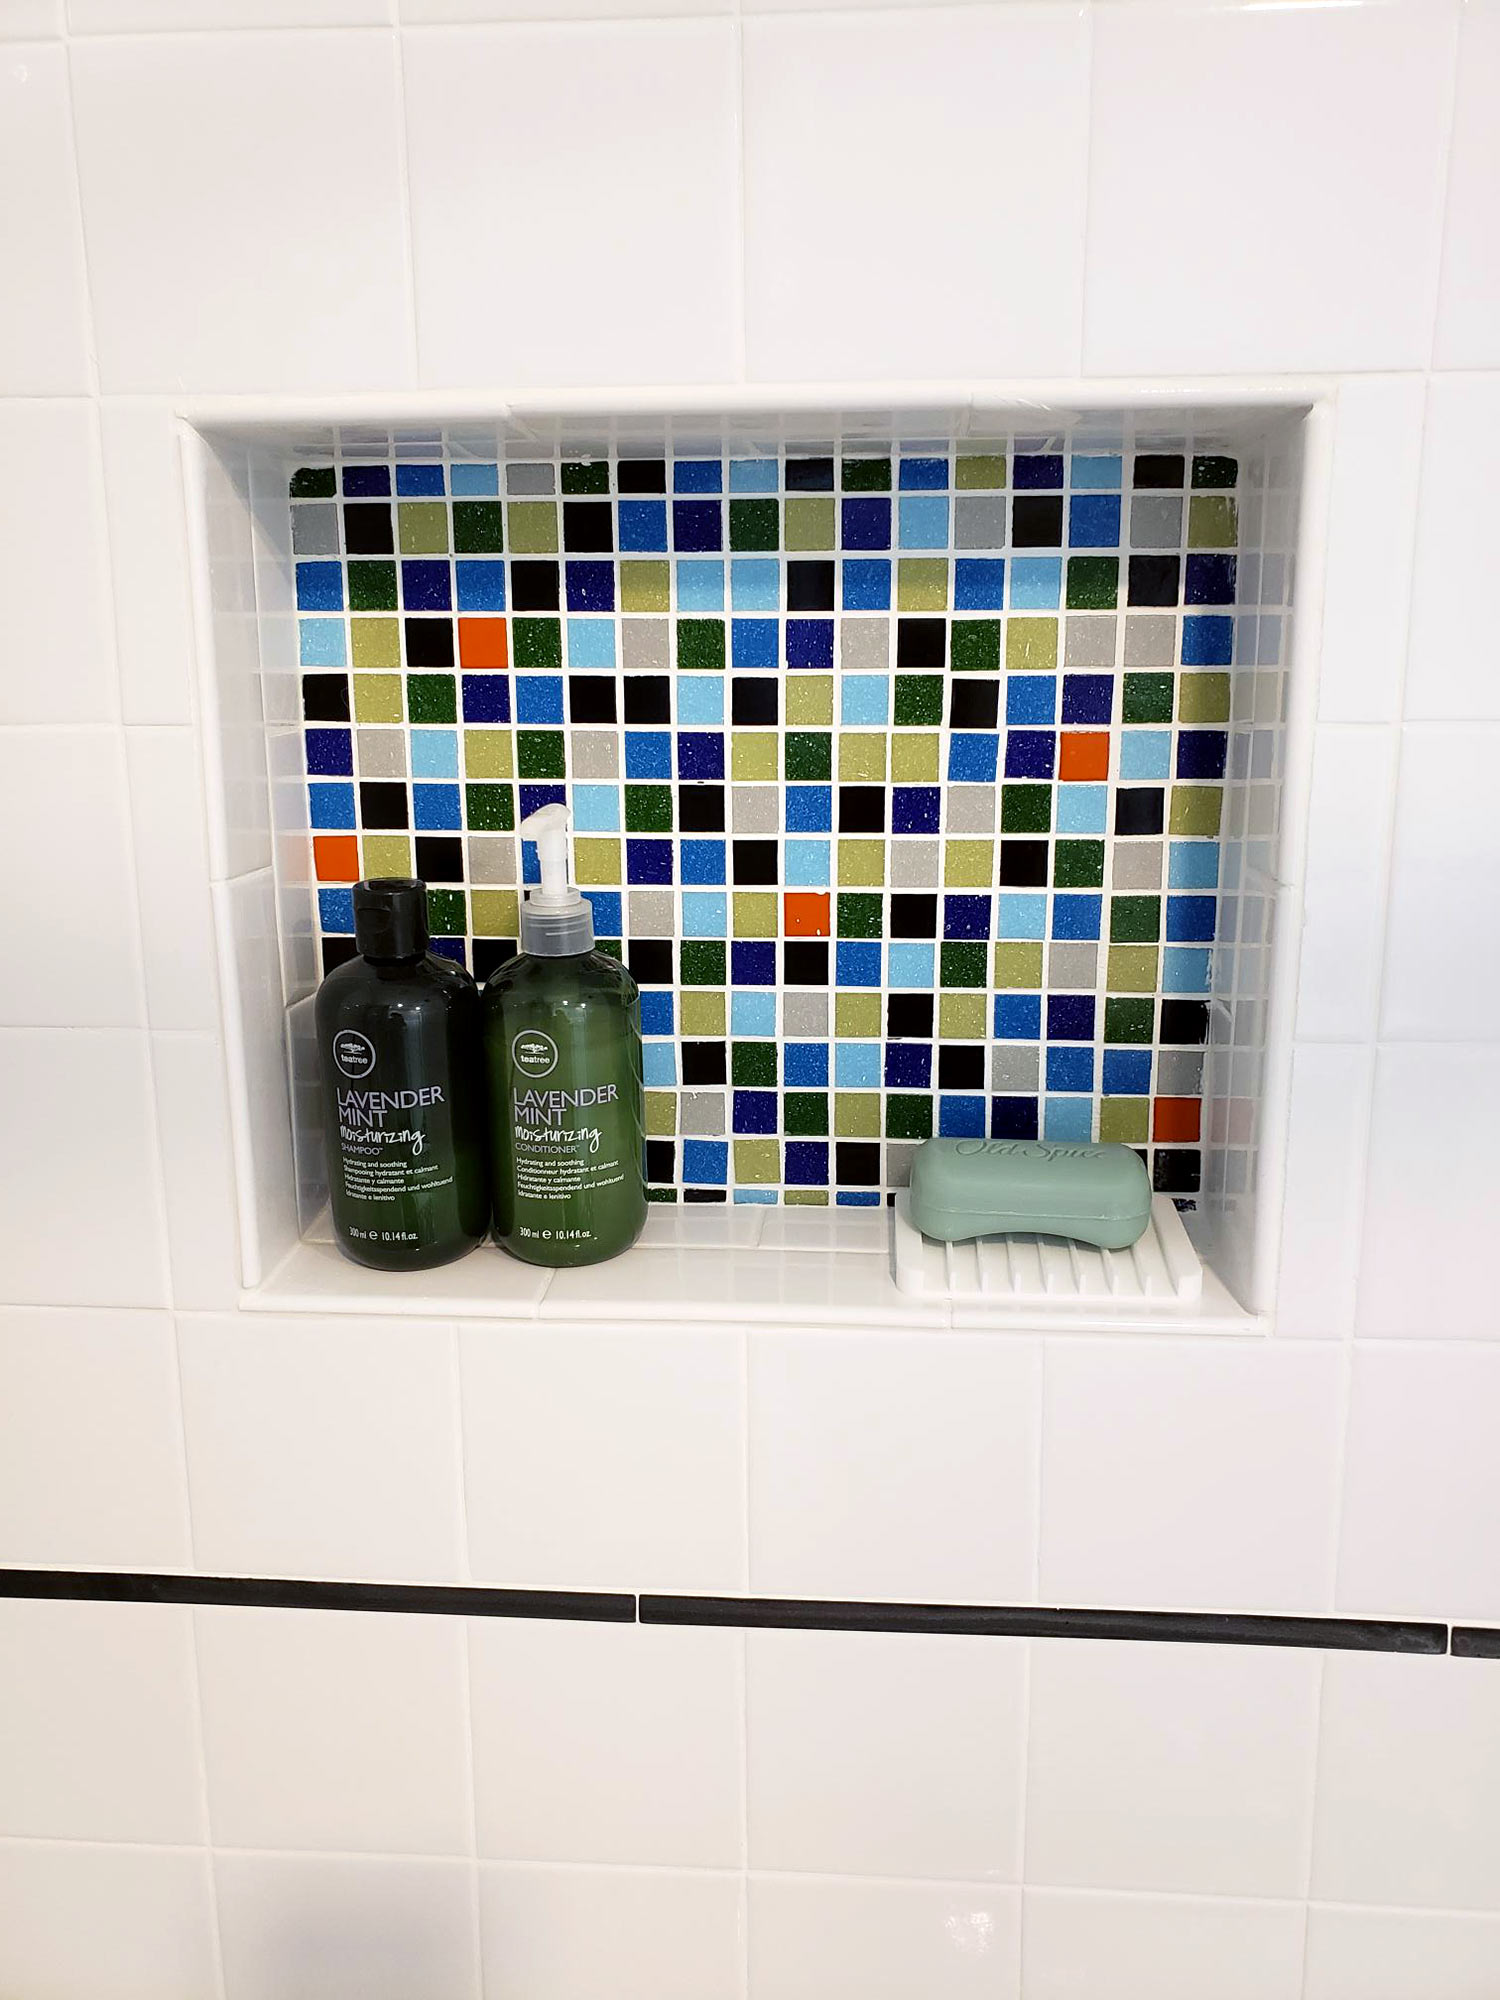 The shower nook was organized for use and function. Keeping things streamlined and minimal were what was important to this client.